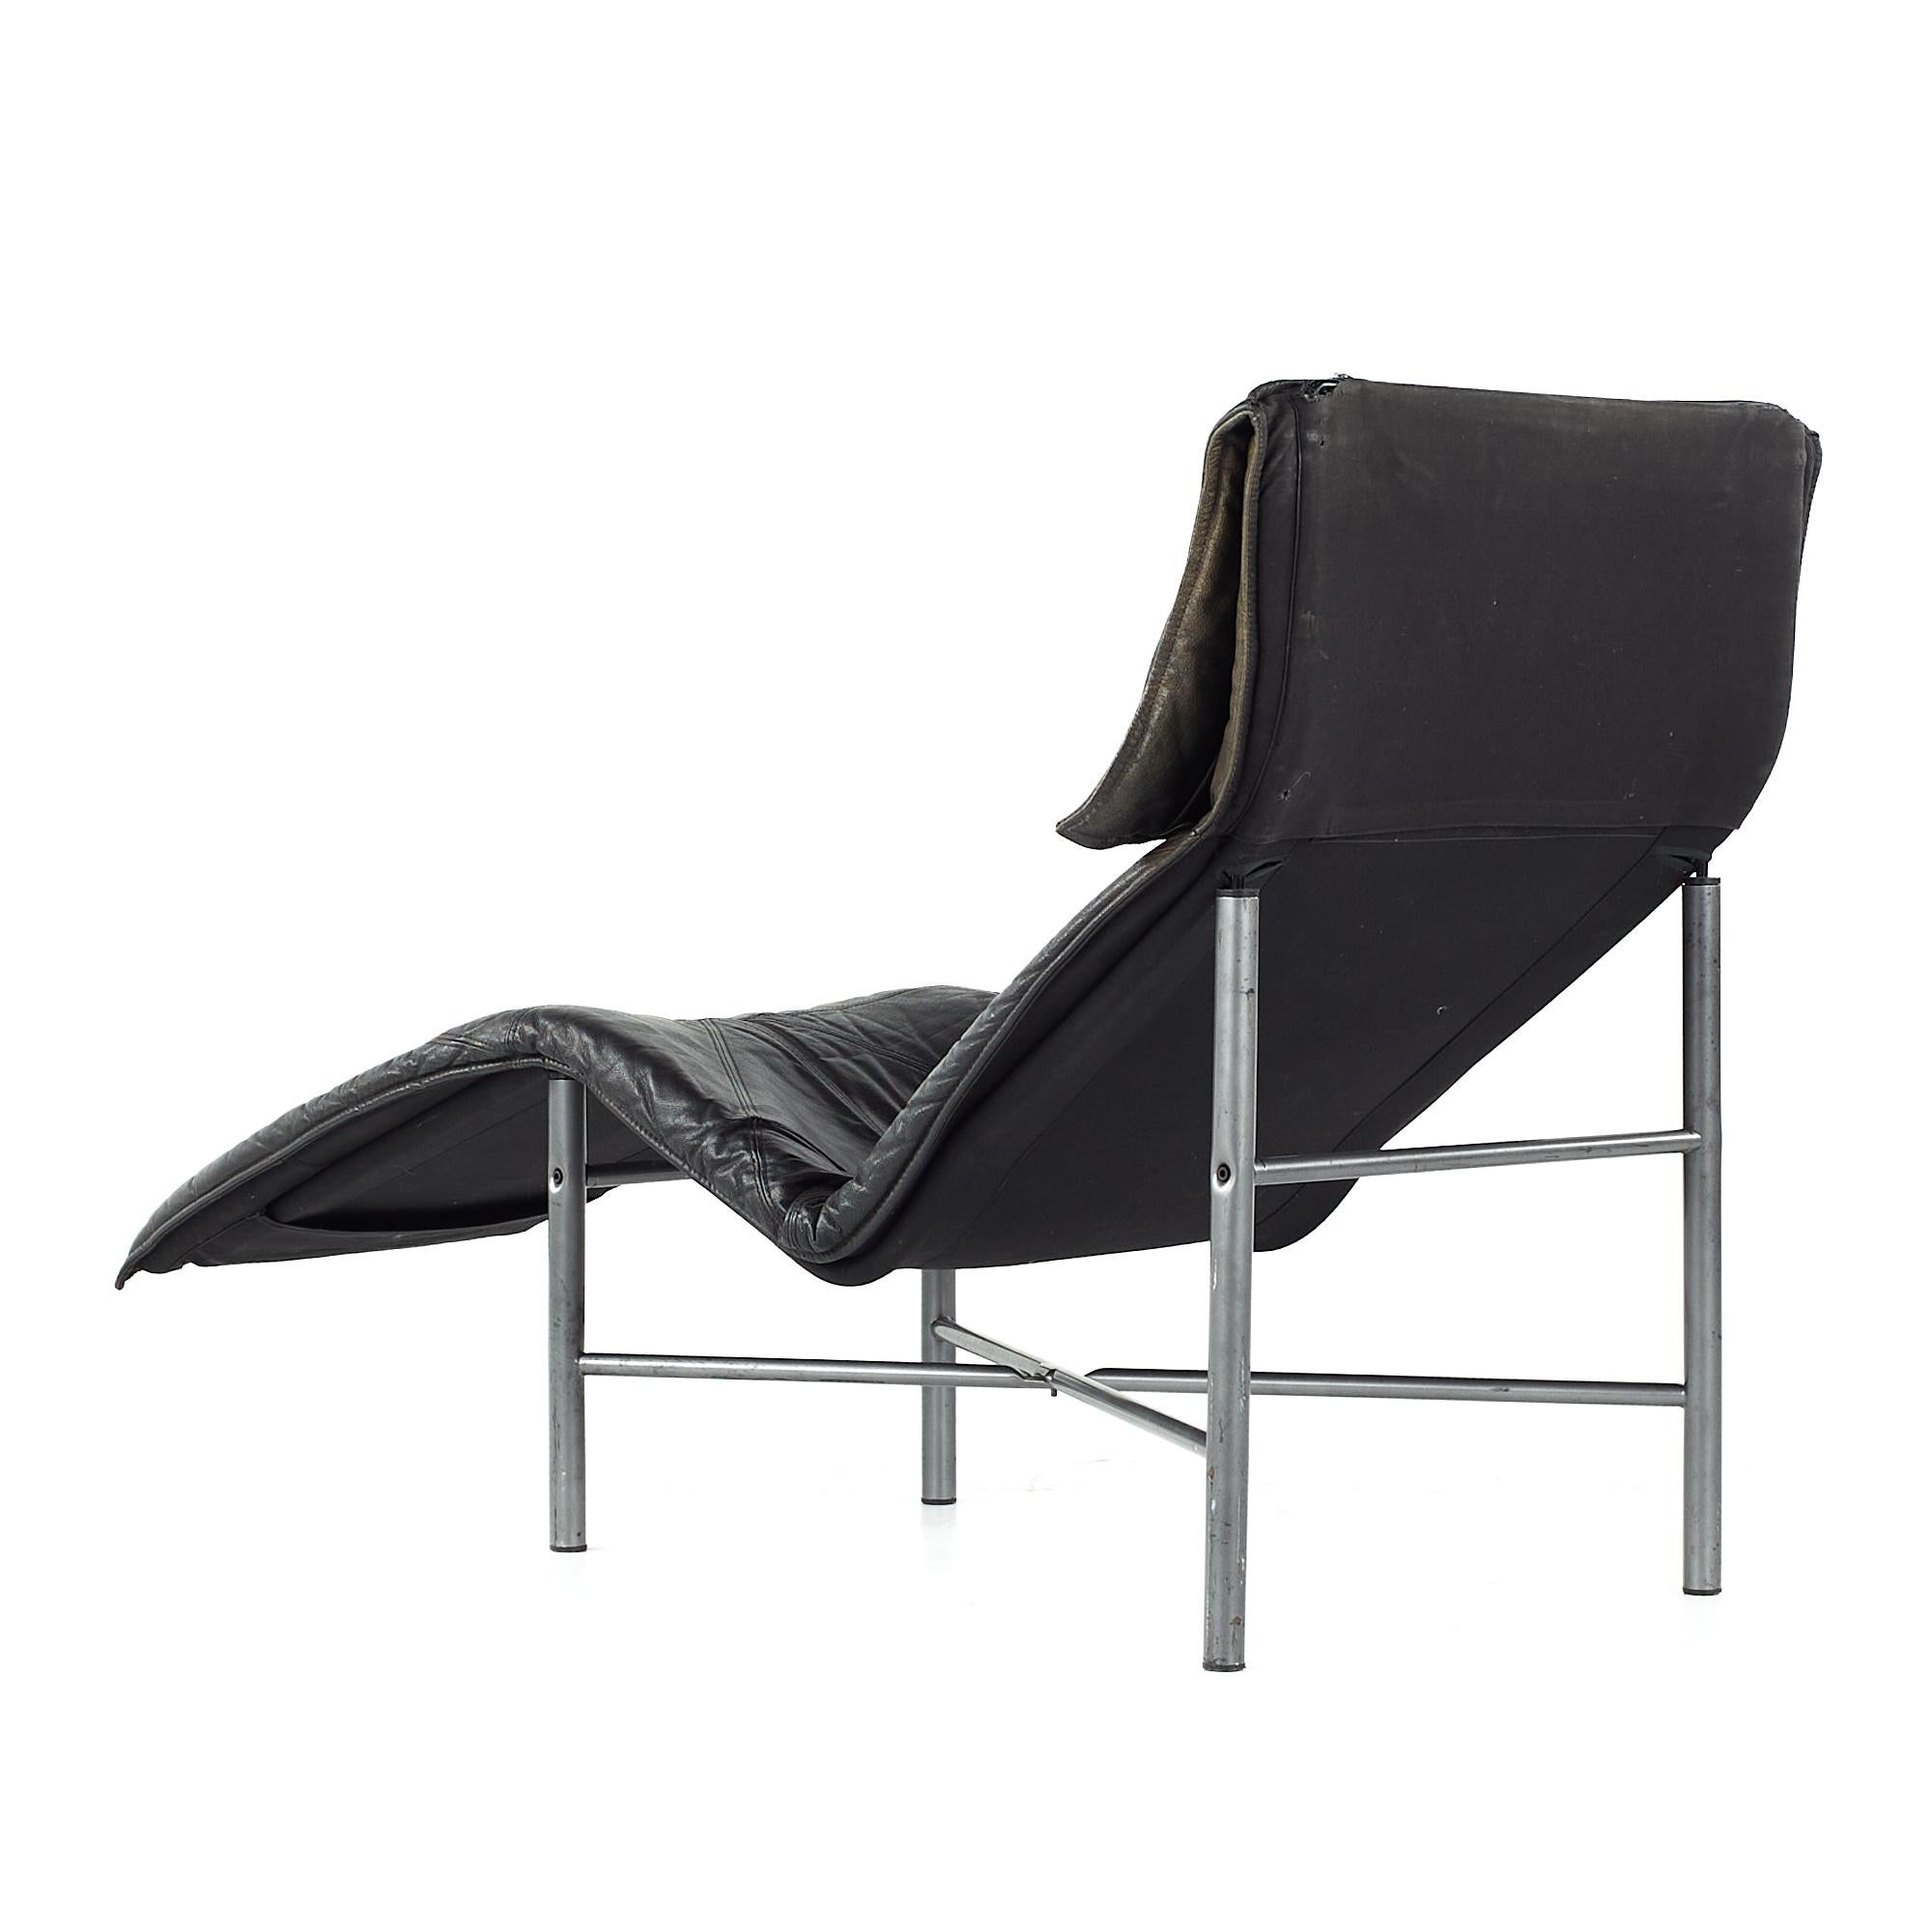 Mid-Century Modern Early Tord Bjorklund for Ikea Midcentury Chaise Leather Lounge Chair For Sale